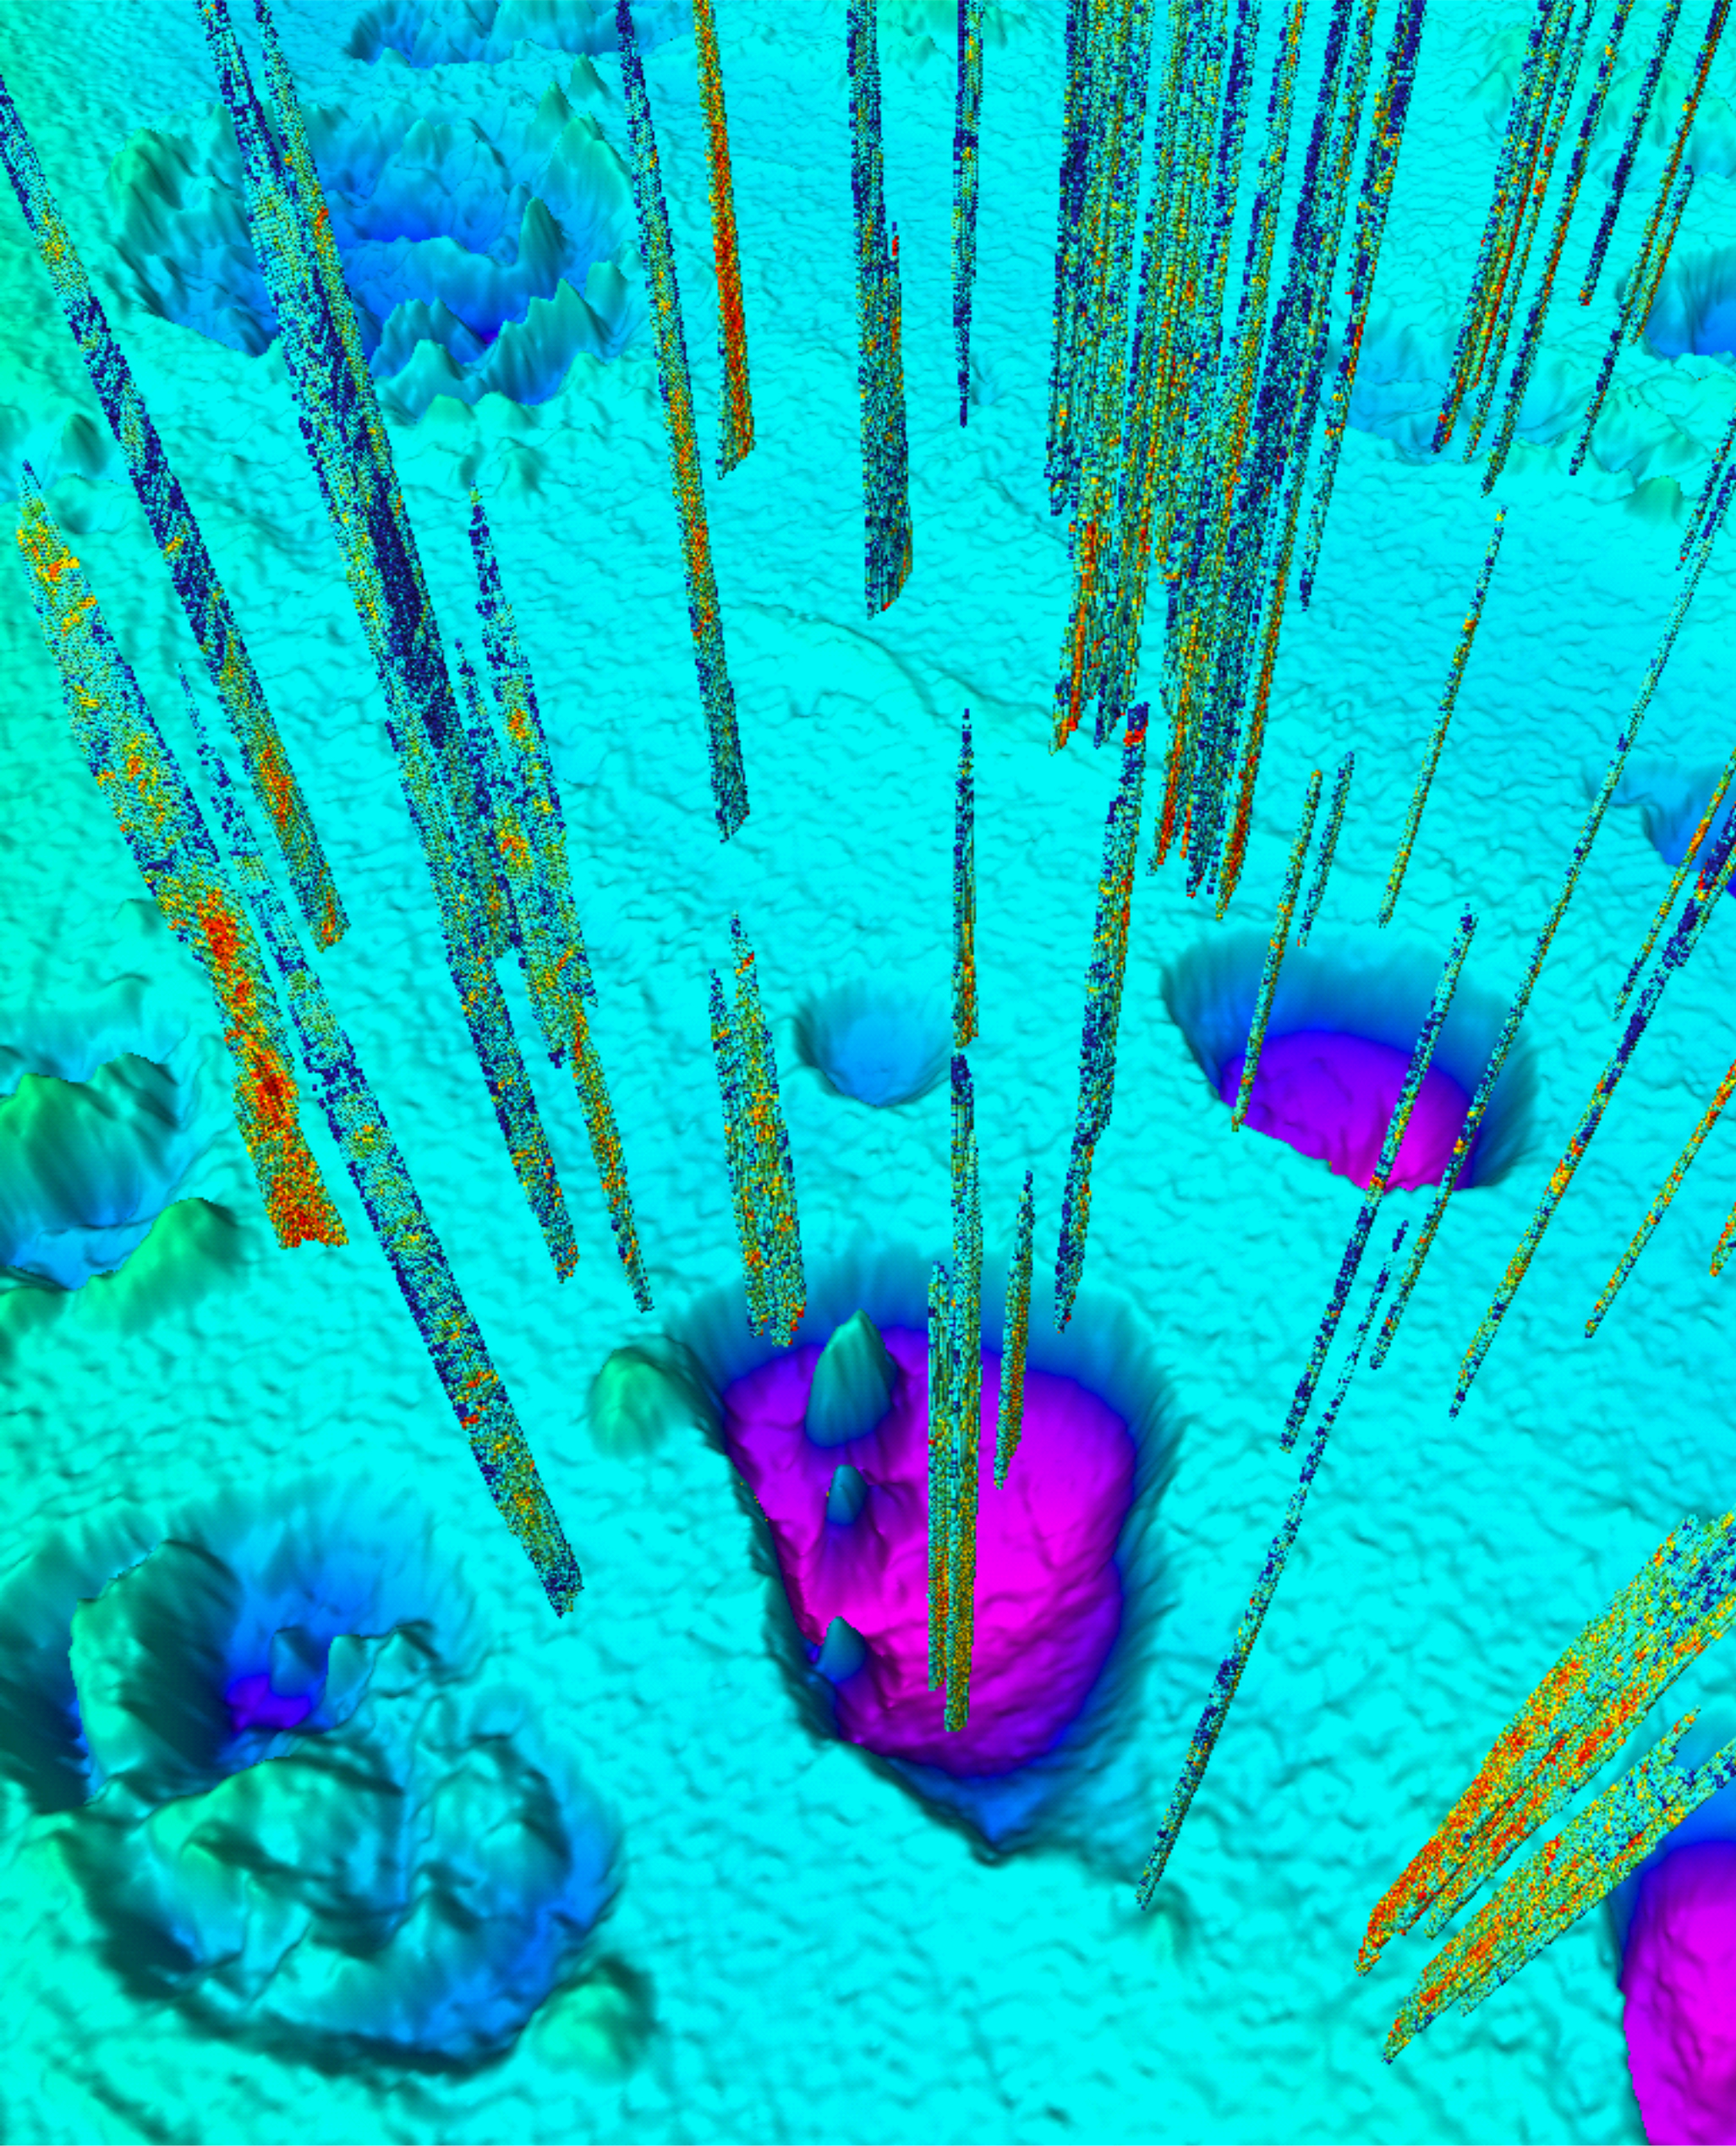 Hundreds Of Giant Seafloor Craters Produced By Explosive Methane Farts